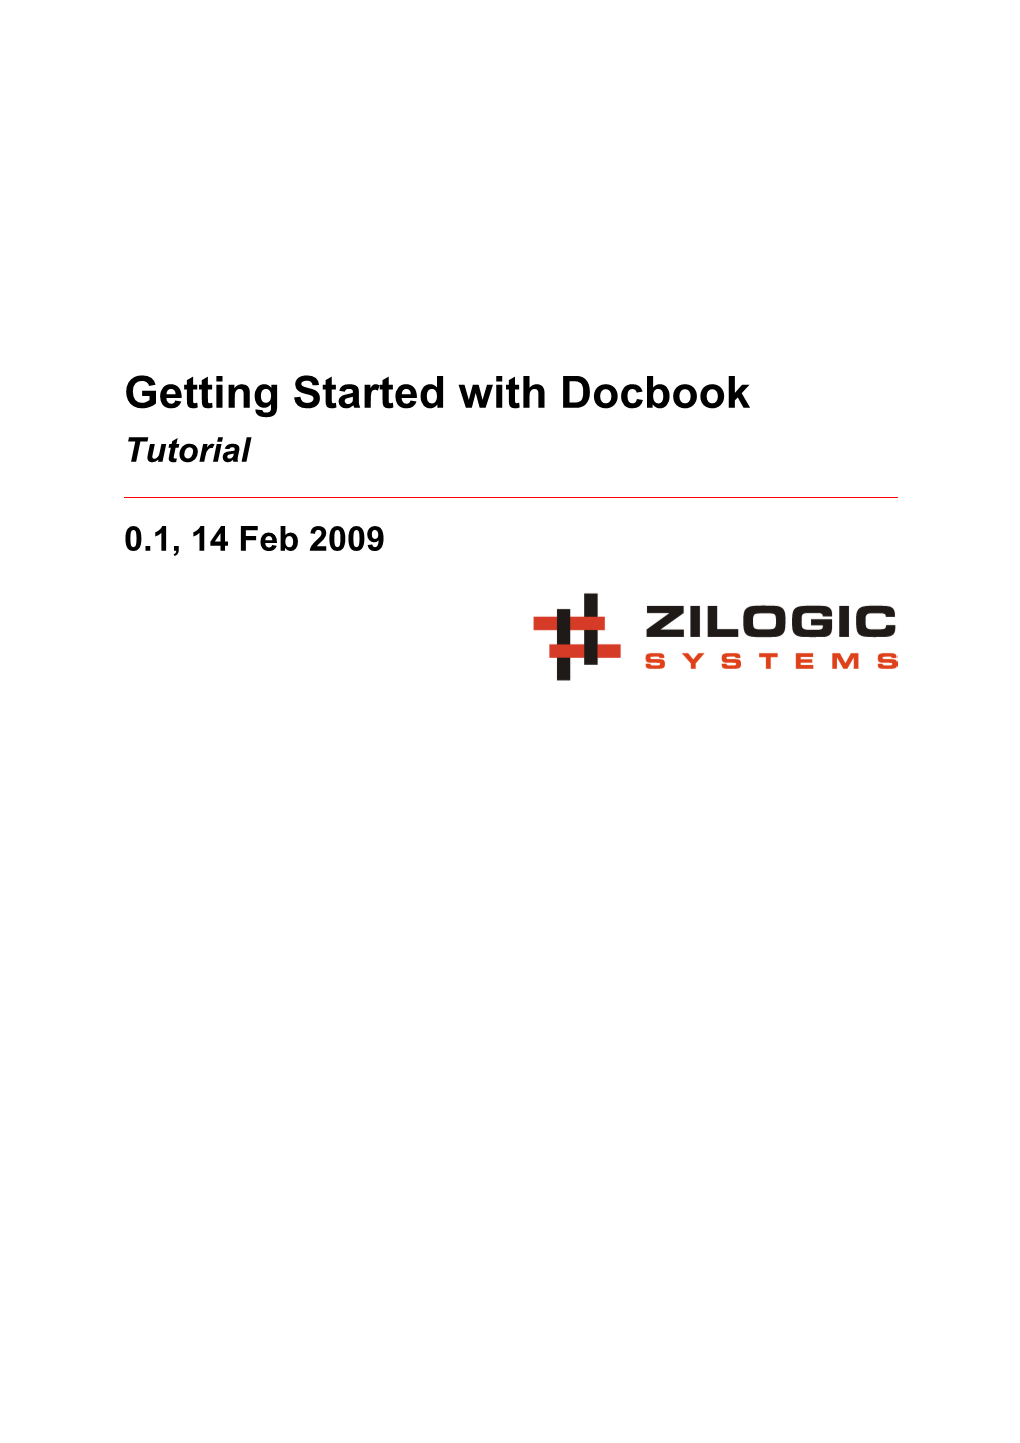 Getting Started with Docbook Tutorial